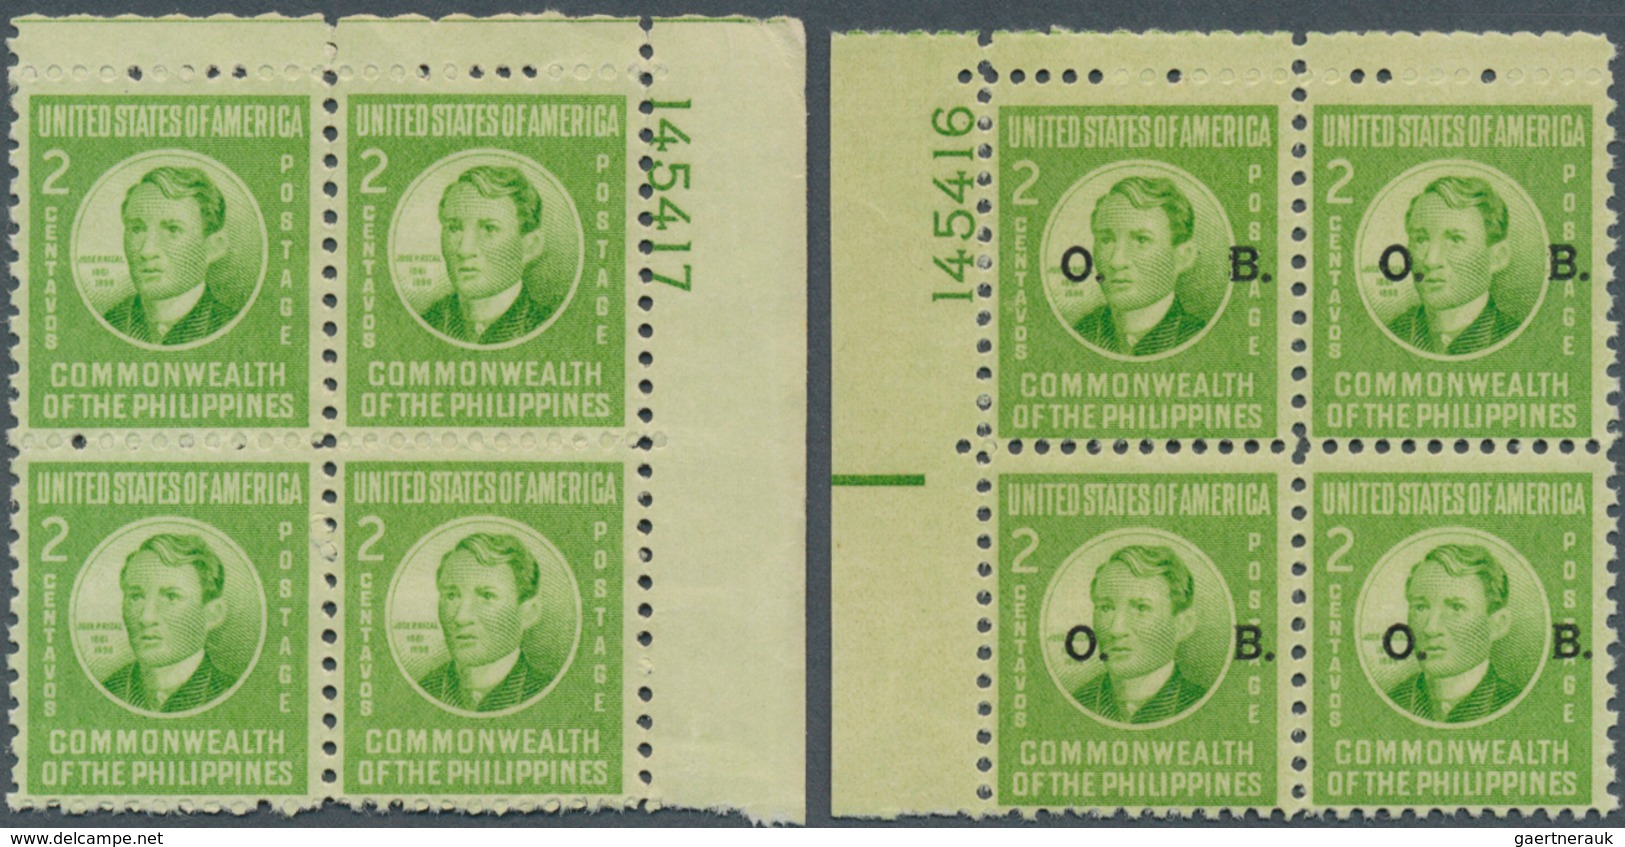 Philippinen: 1935/1978 (approx). Lot containing 20 essay photos, 2 negatives and 1 artwork pencil on